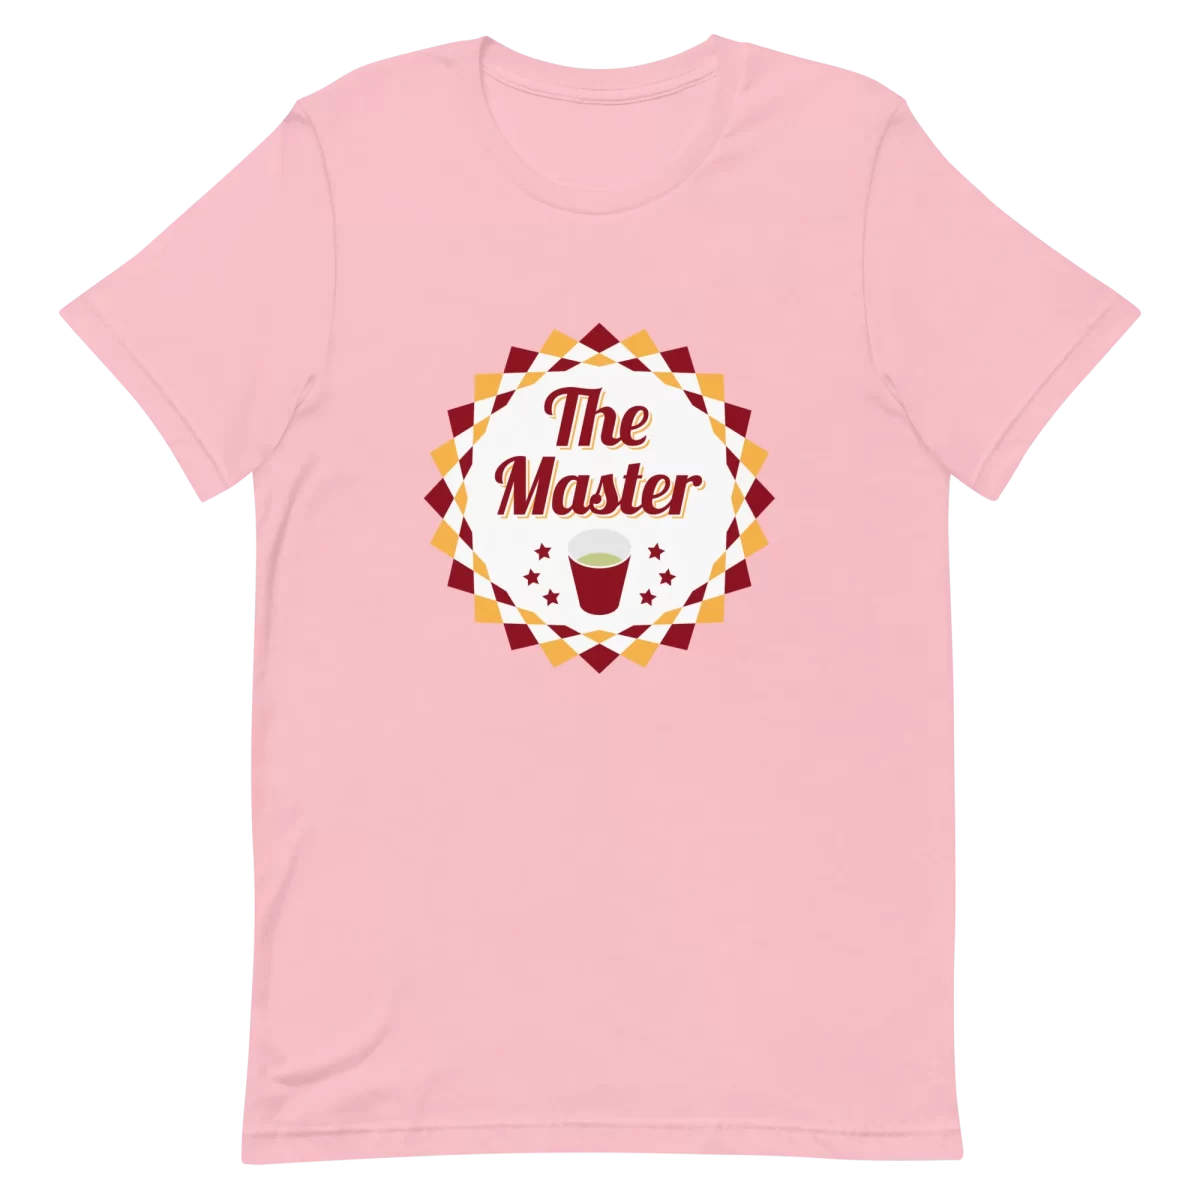 Unisex T-Shirt - The Master - Pink